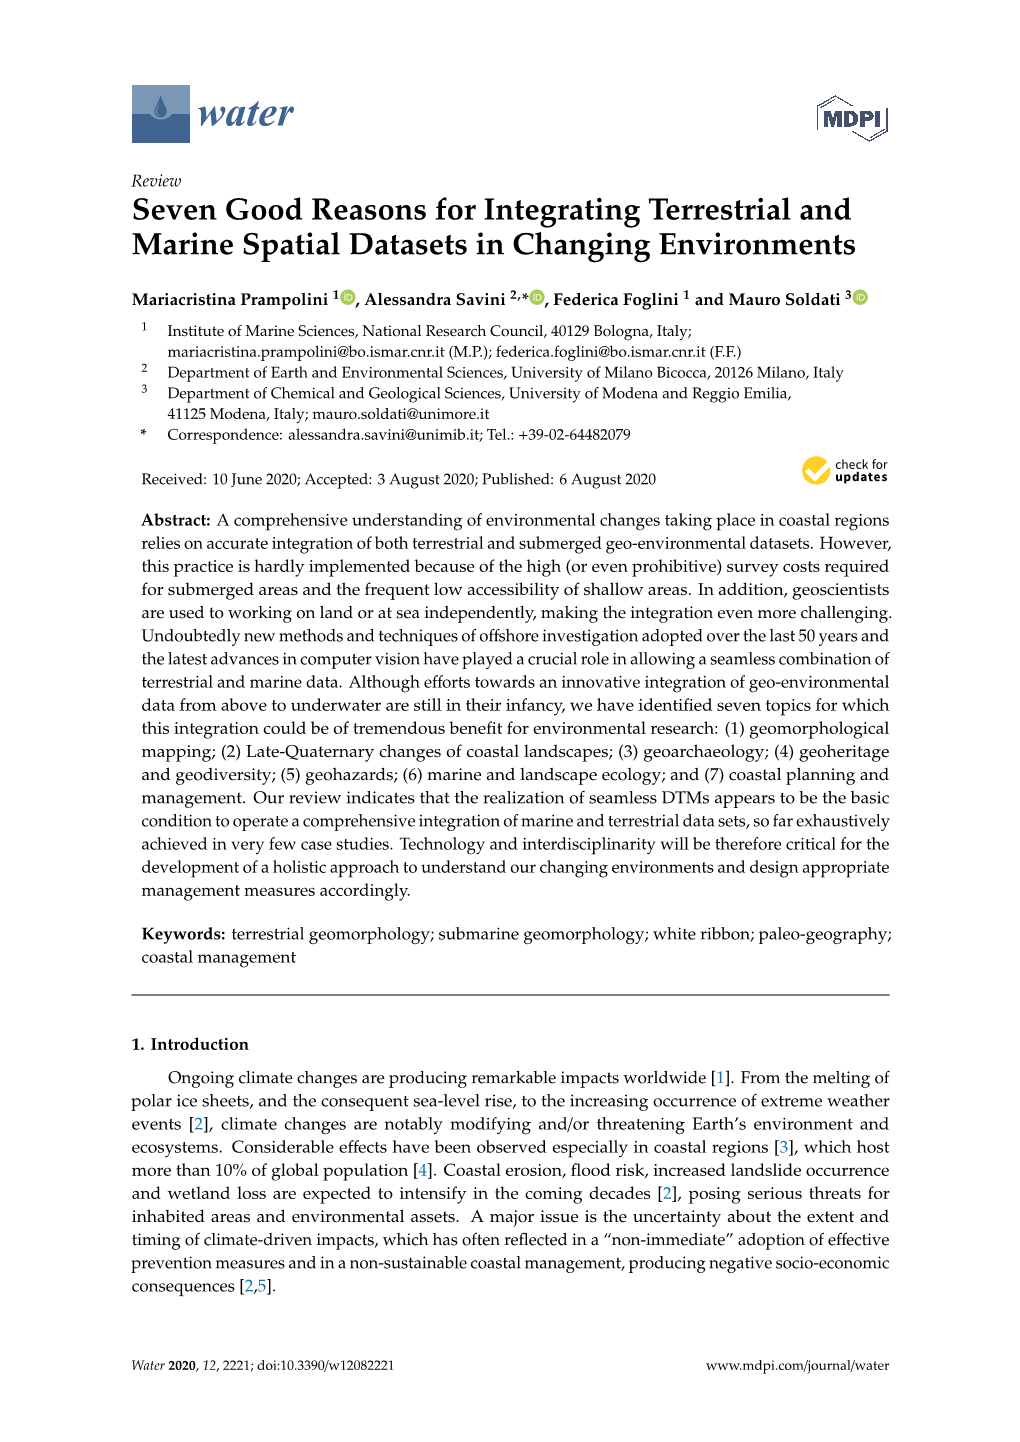 Seven Good Reasons for Integrating Terrestrial and Marine Spatial Datasets in Changing Environments